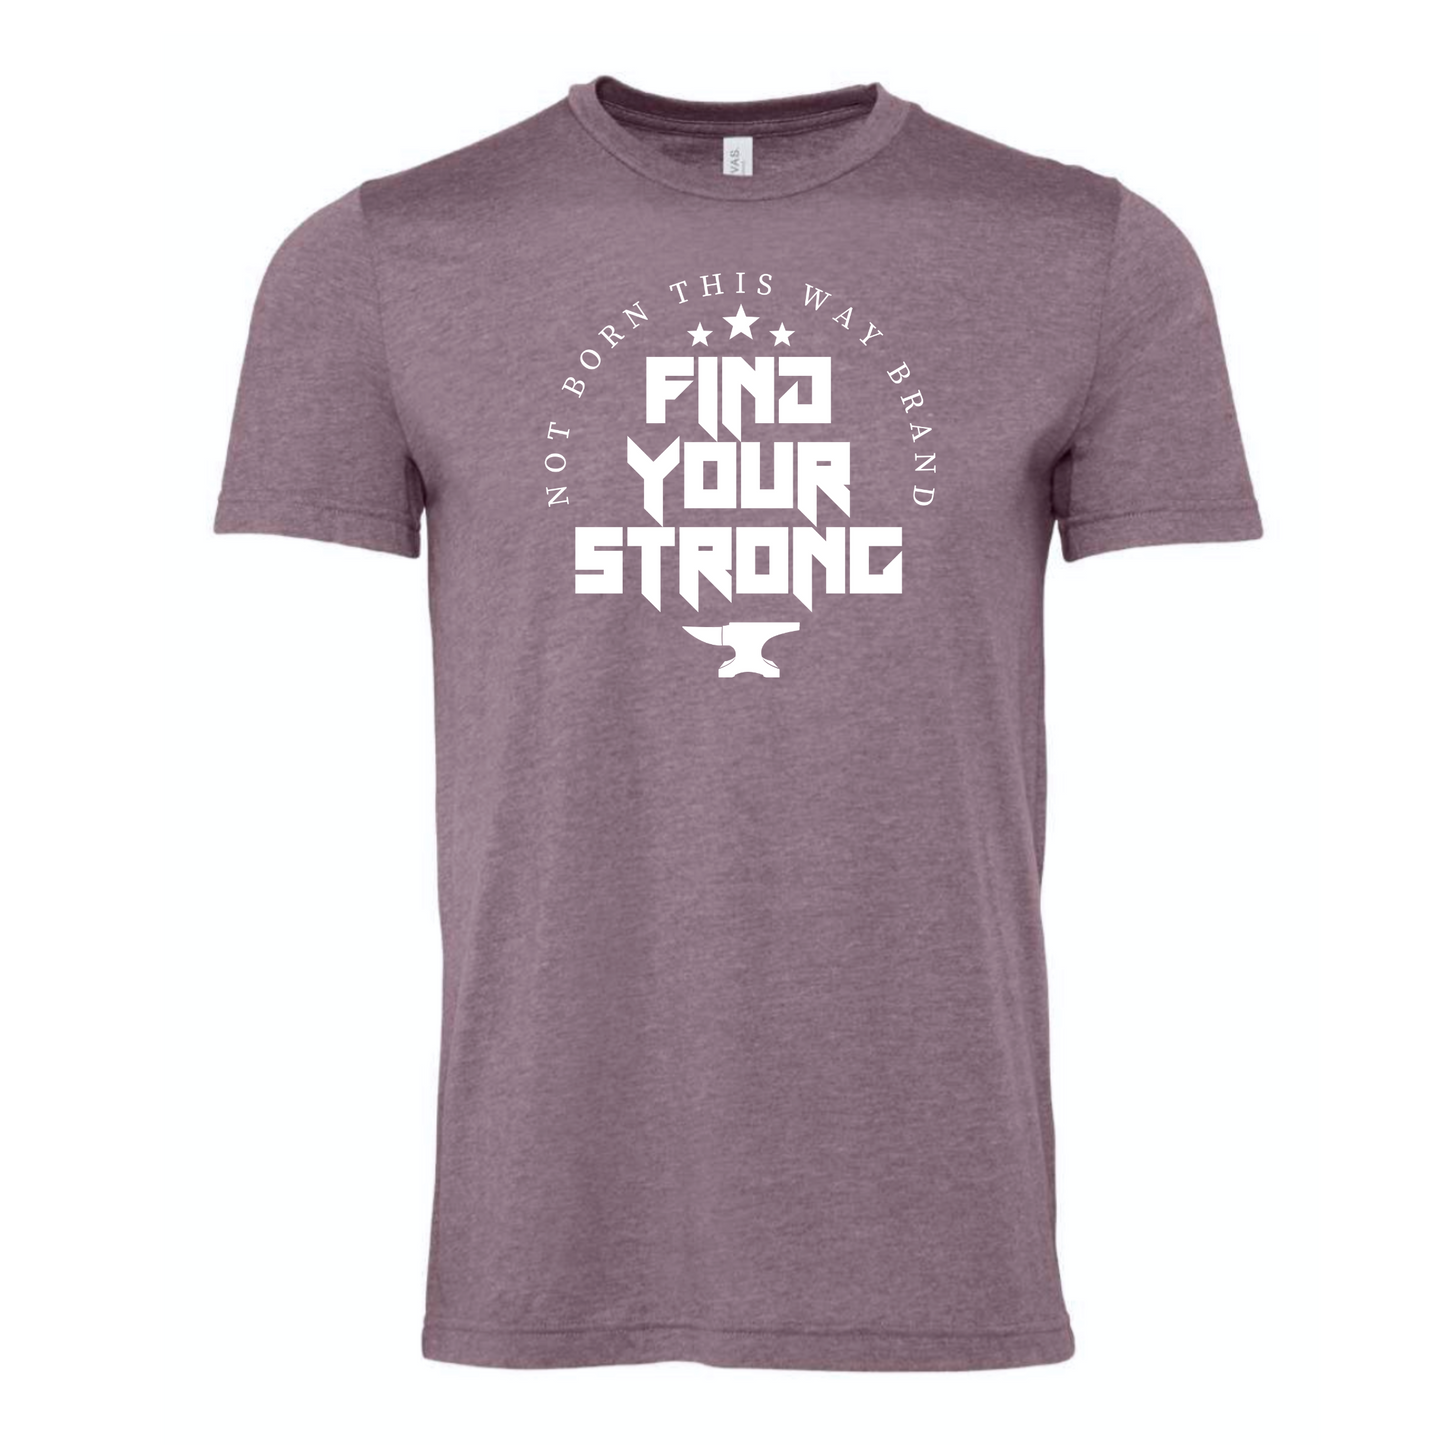 FIND YOUR STRONG - Unisex Tee